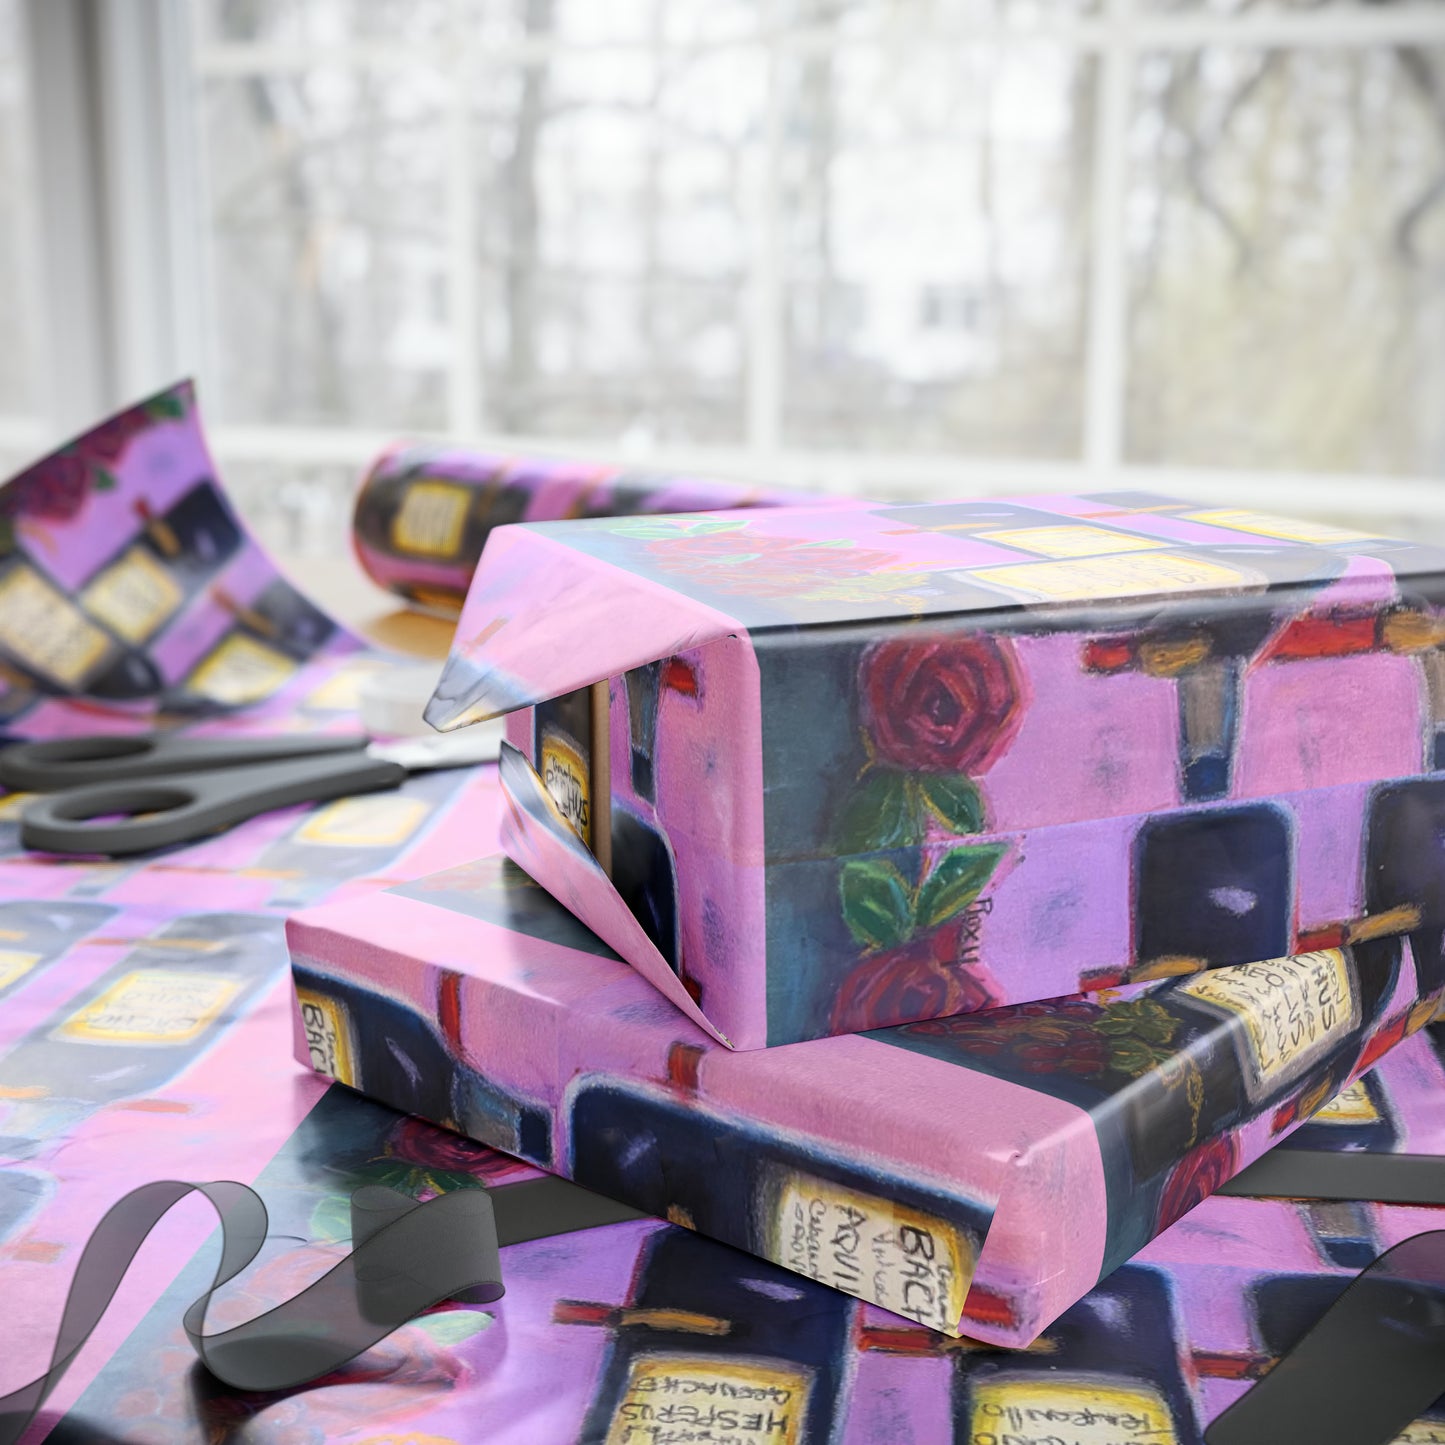 Bachus Rack GBV Wine Rack and Roses Wrapping Papers